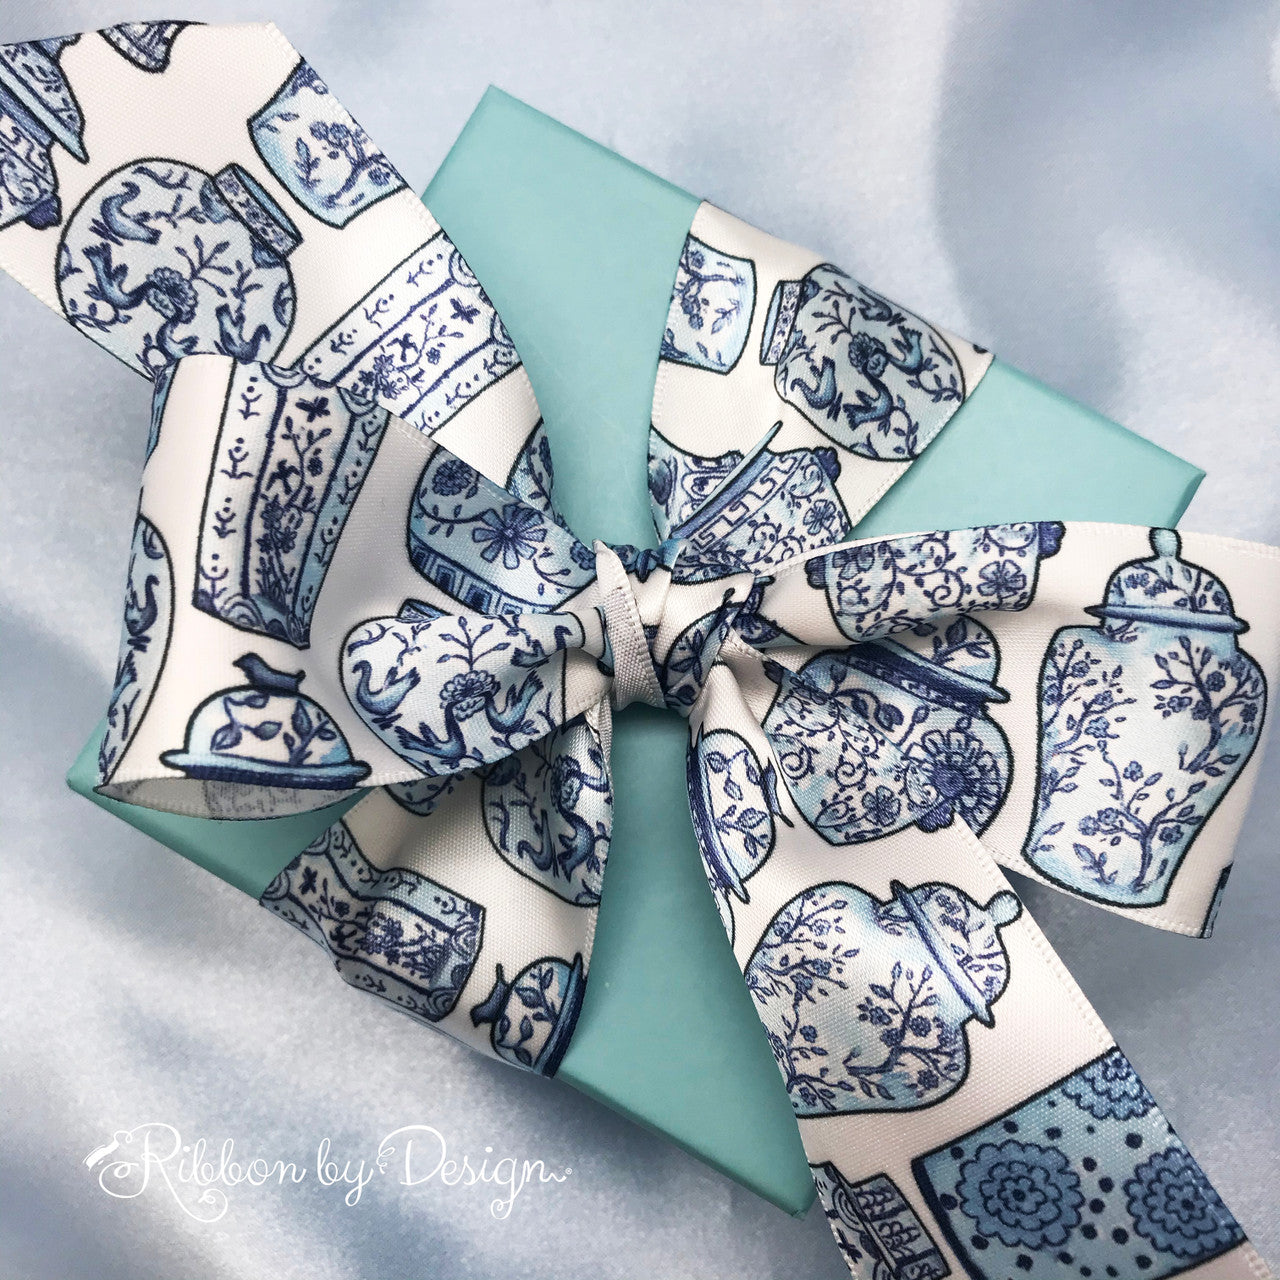 The beauty of this ribbon is in the quality of the fabric. It will tie a perfect bow for that very special gift.